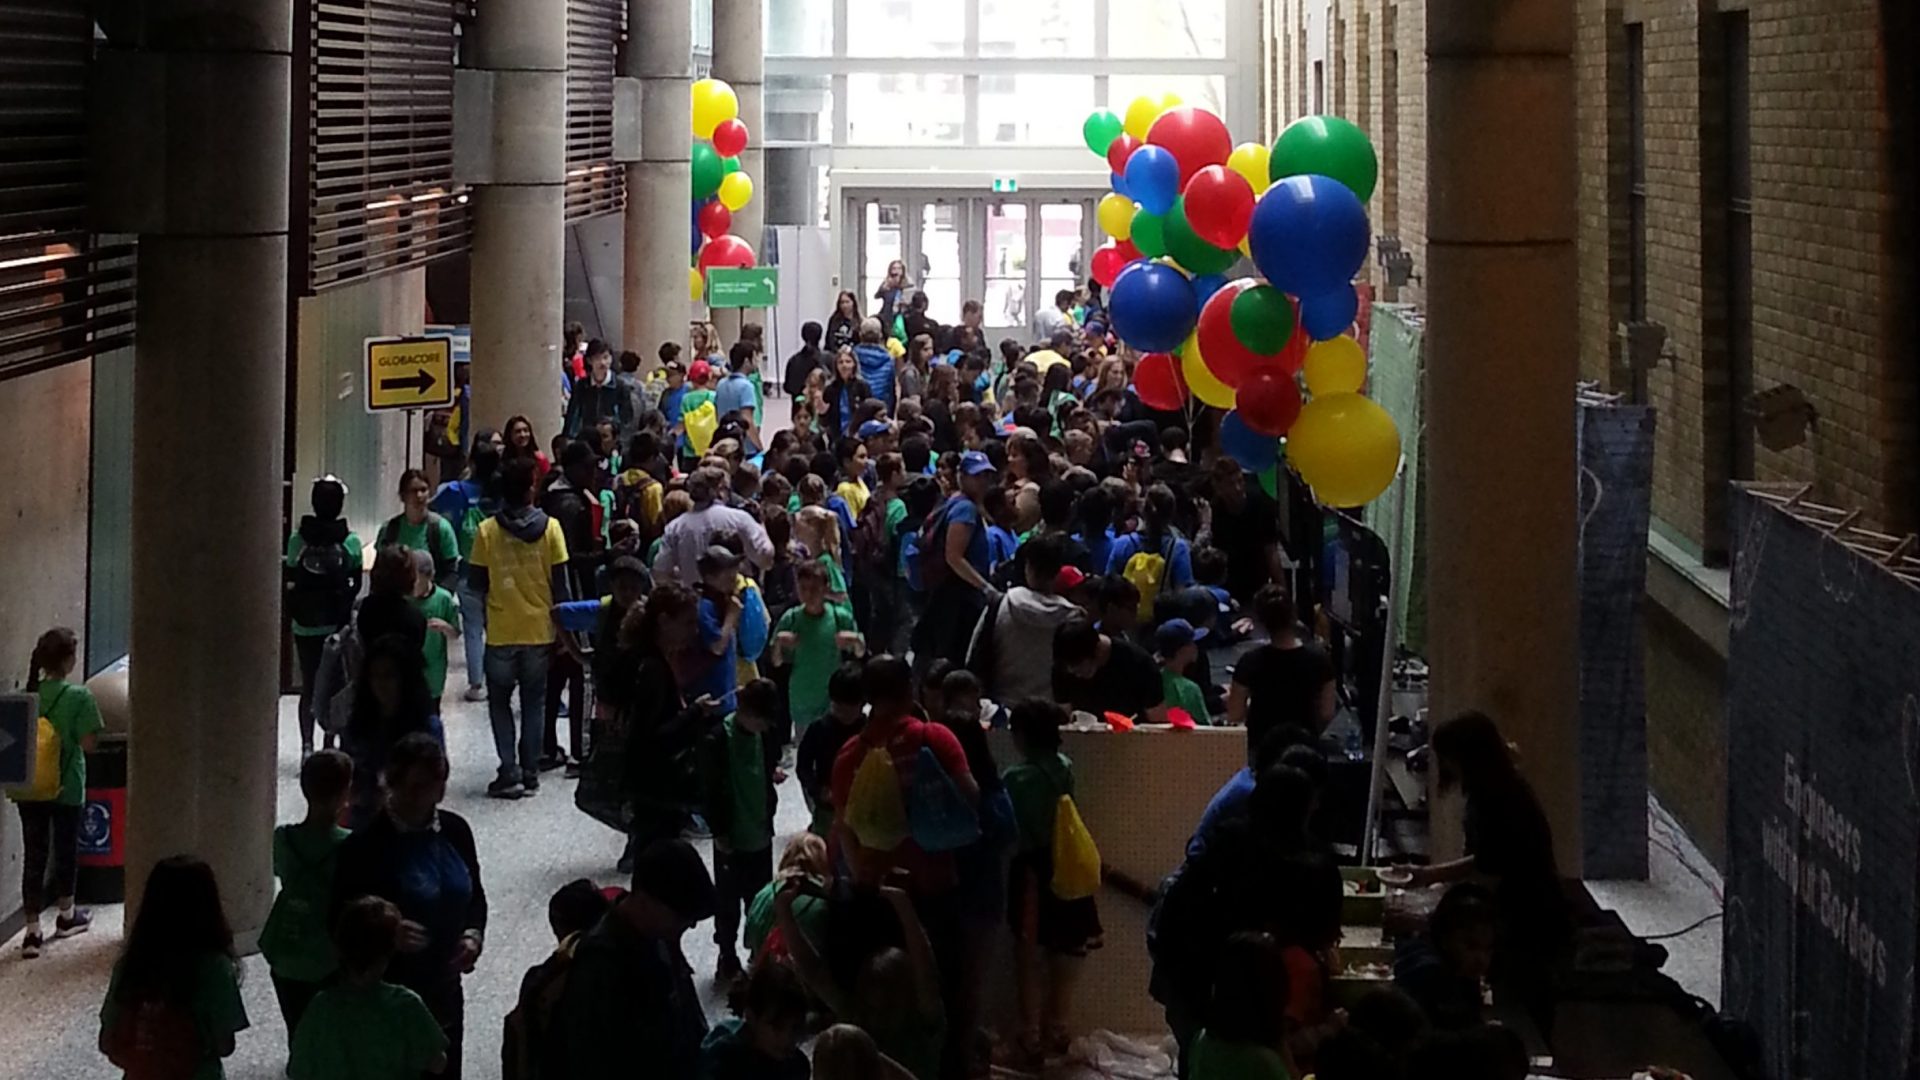 Bahen Centre main hallway decked in balloons and filled with students